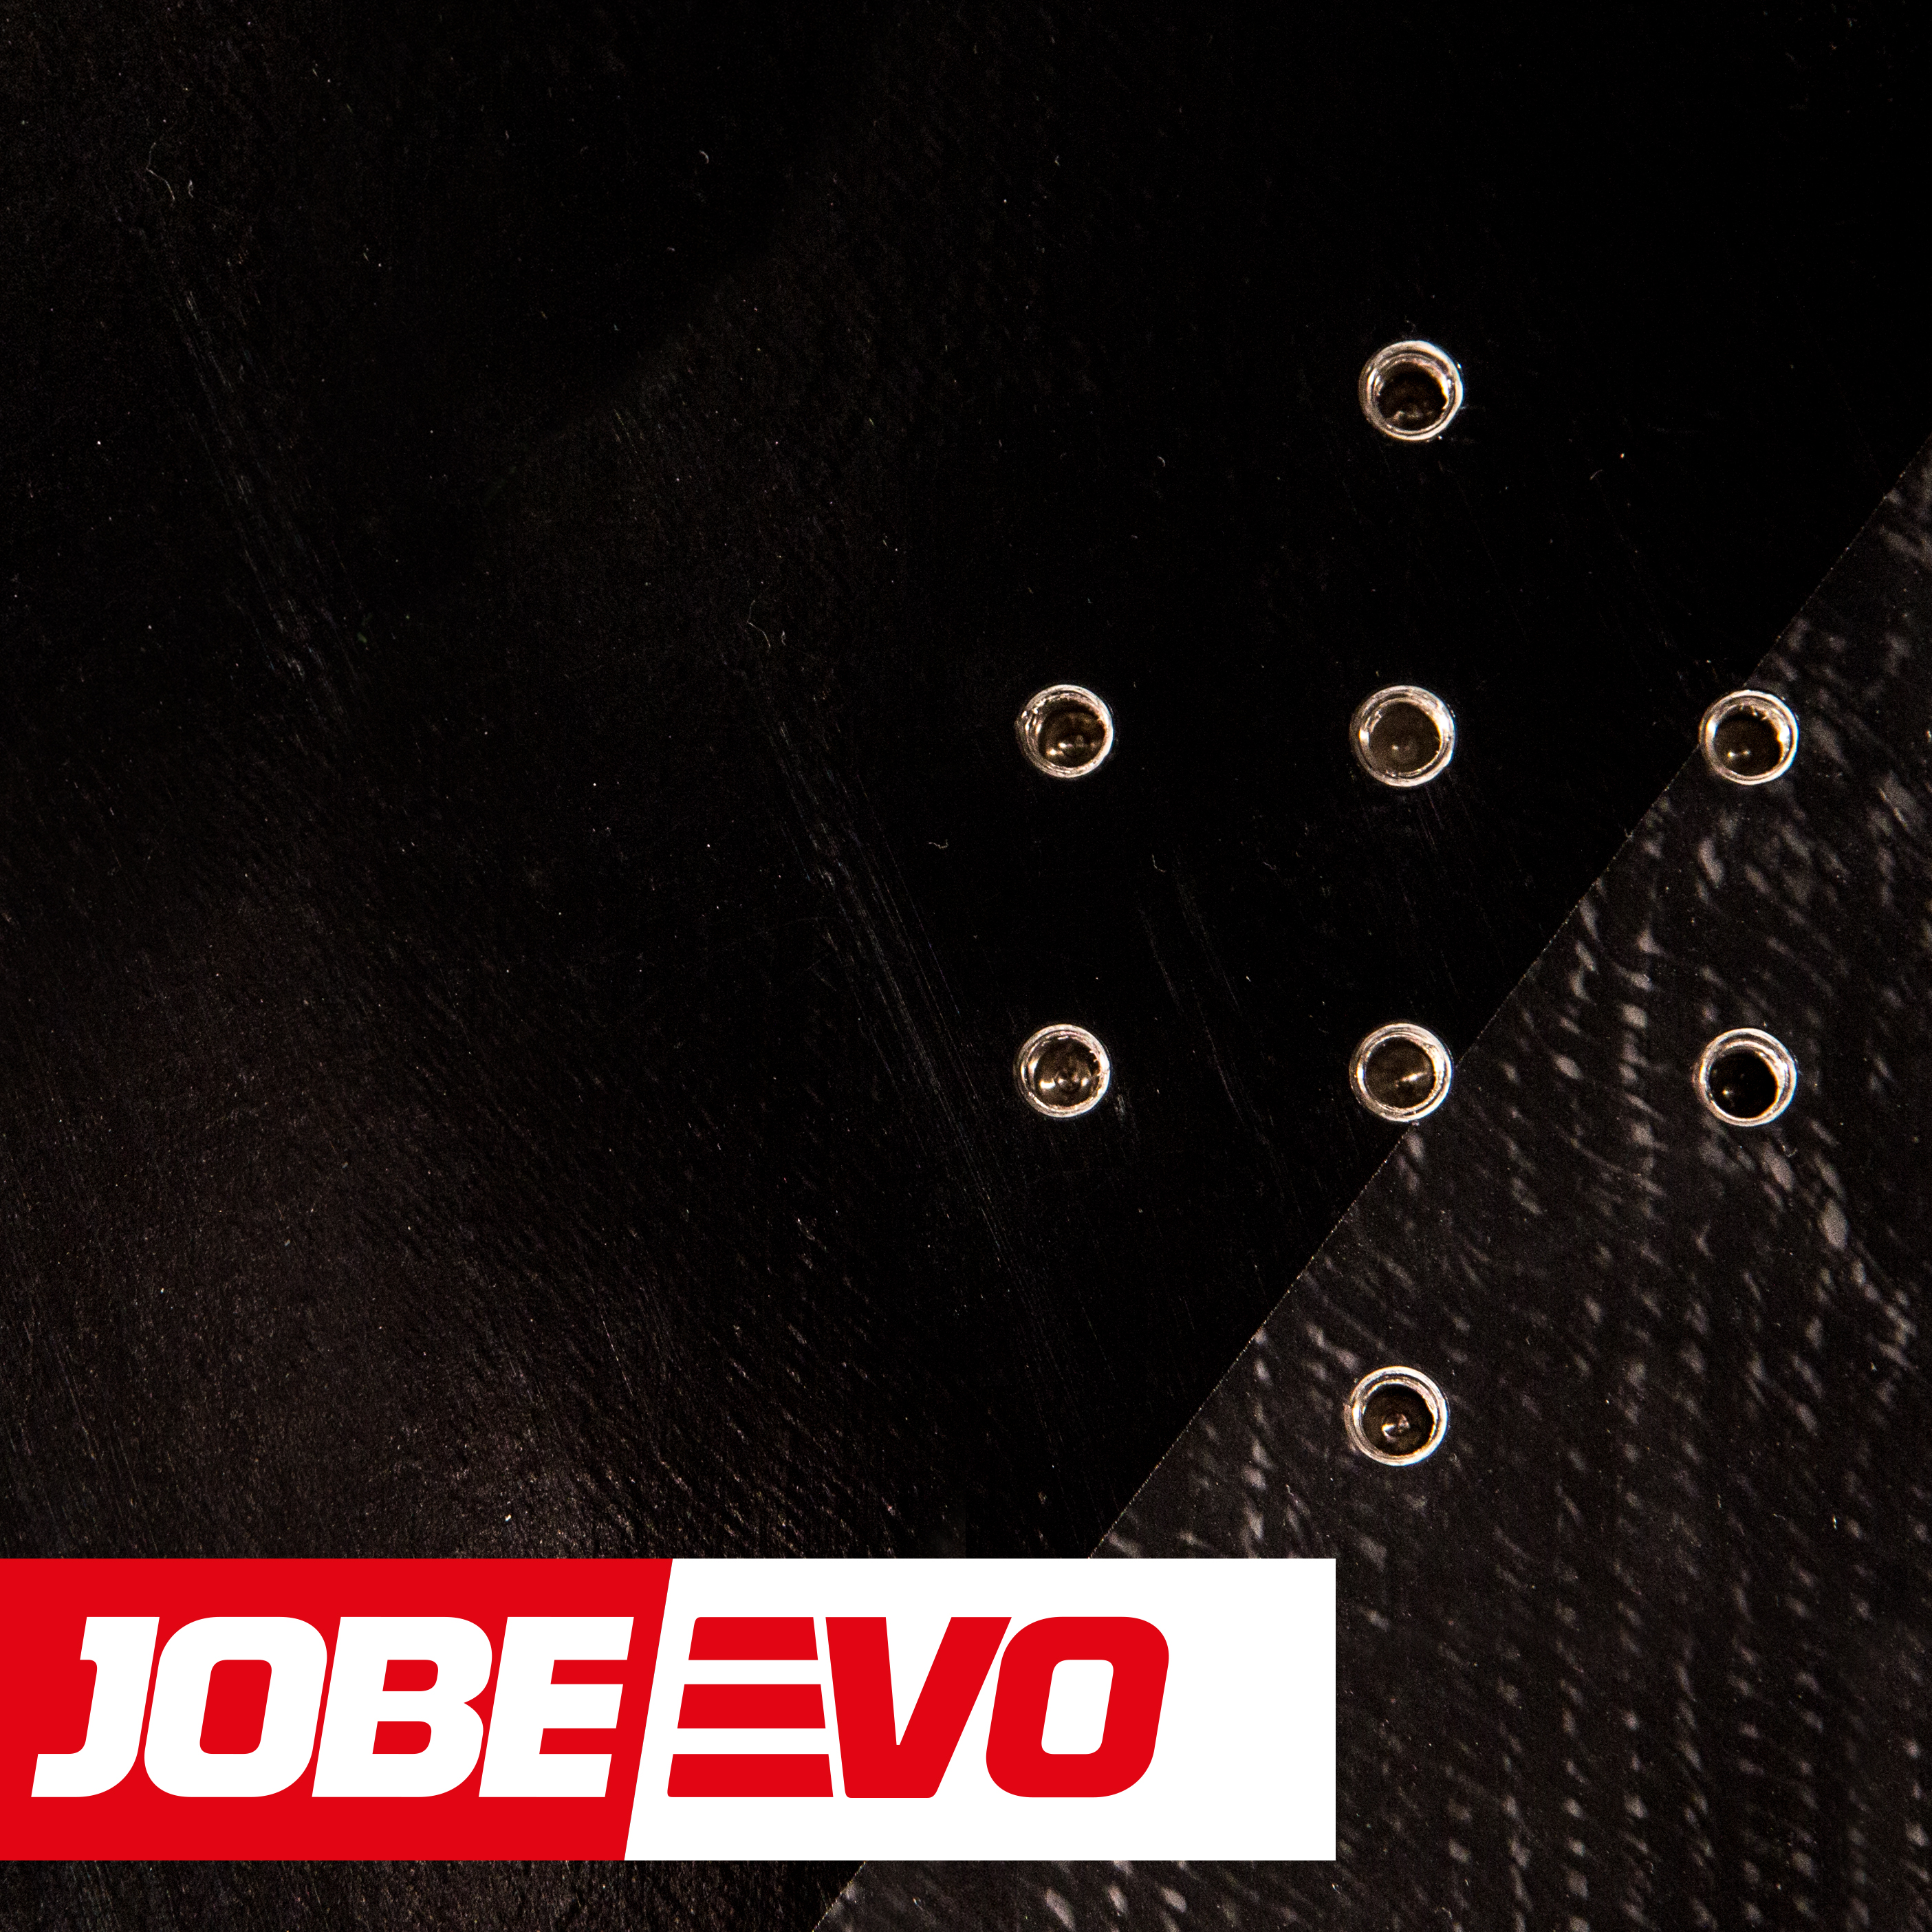 what we know about the jobe evo